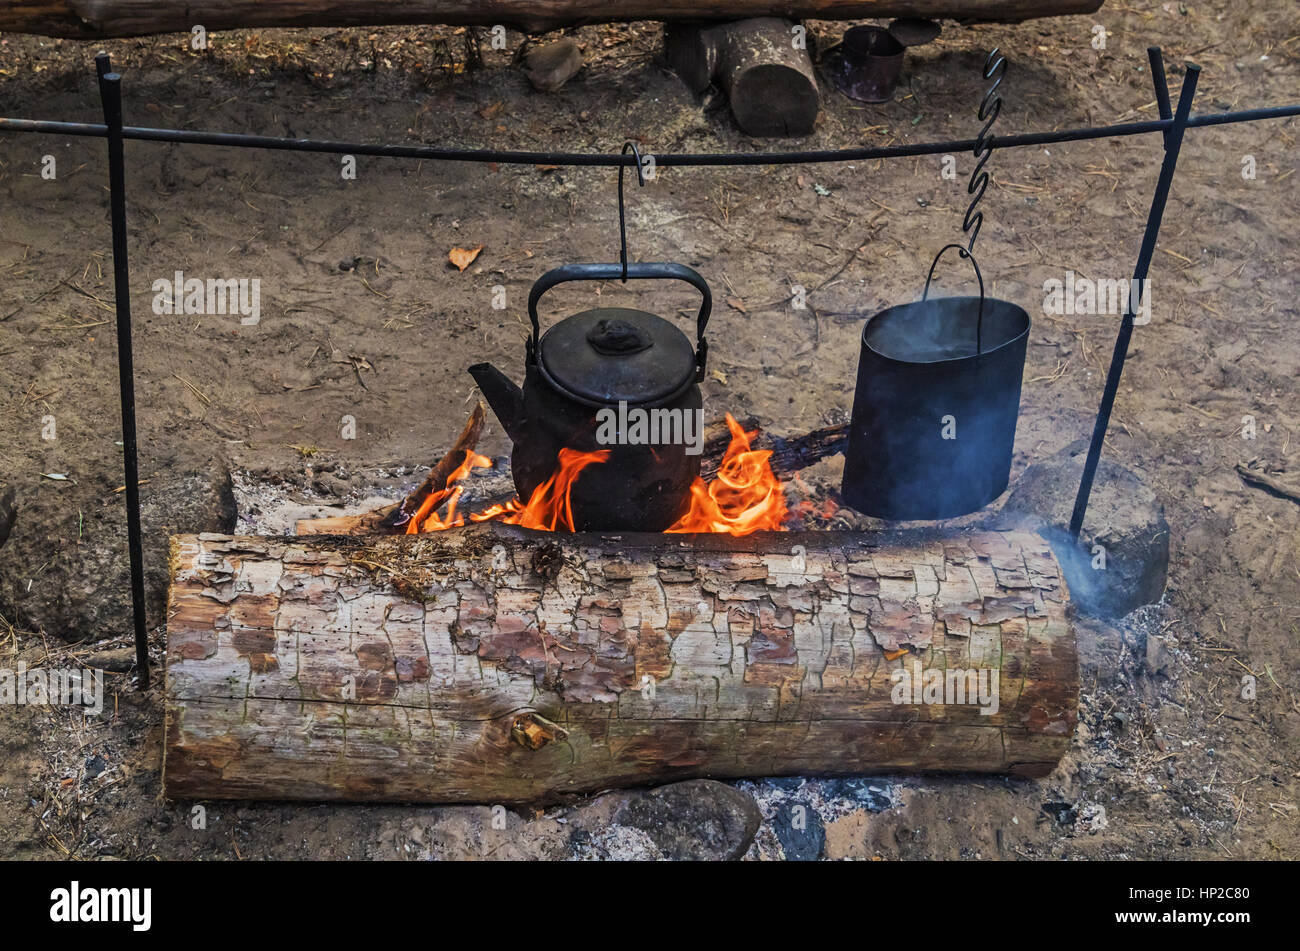 https://c8.alamy.com/comp/HP2C80/teapot-and-kettle-on-a-campfire-HP2C80.jpg